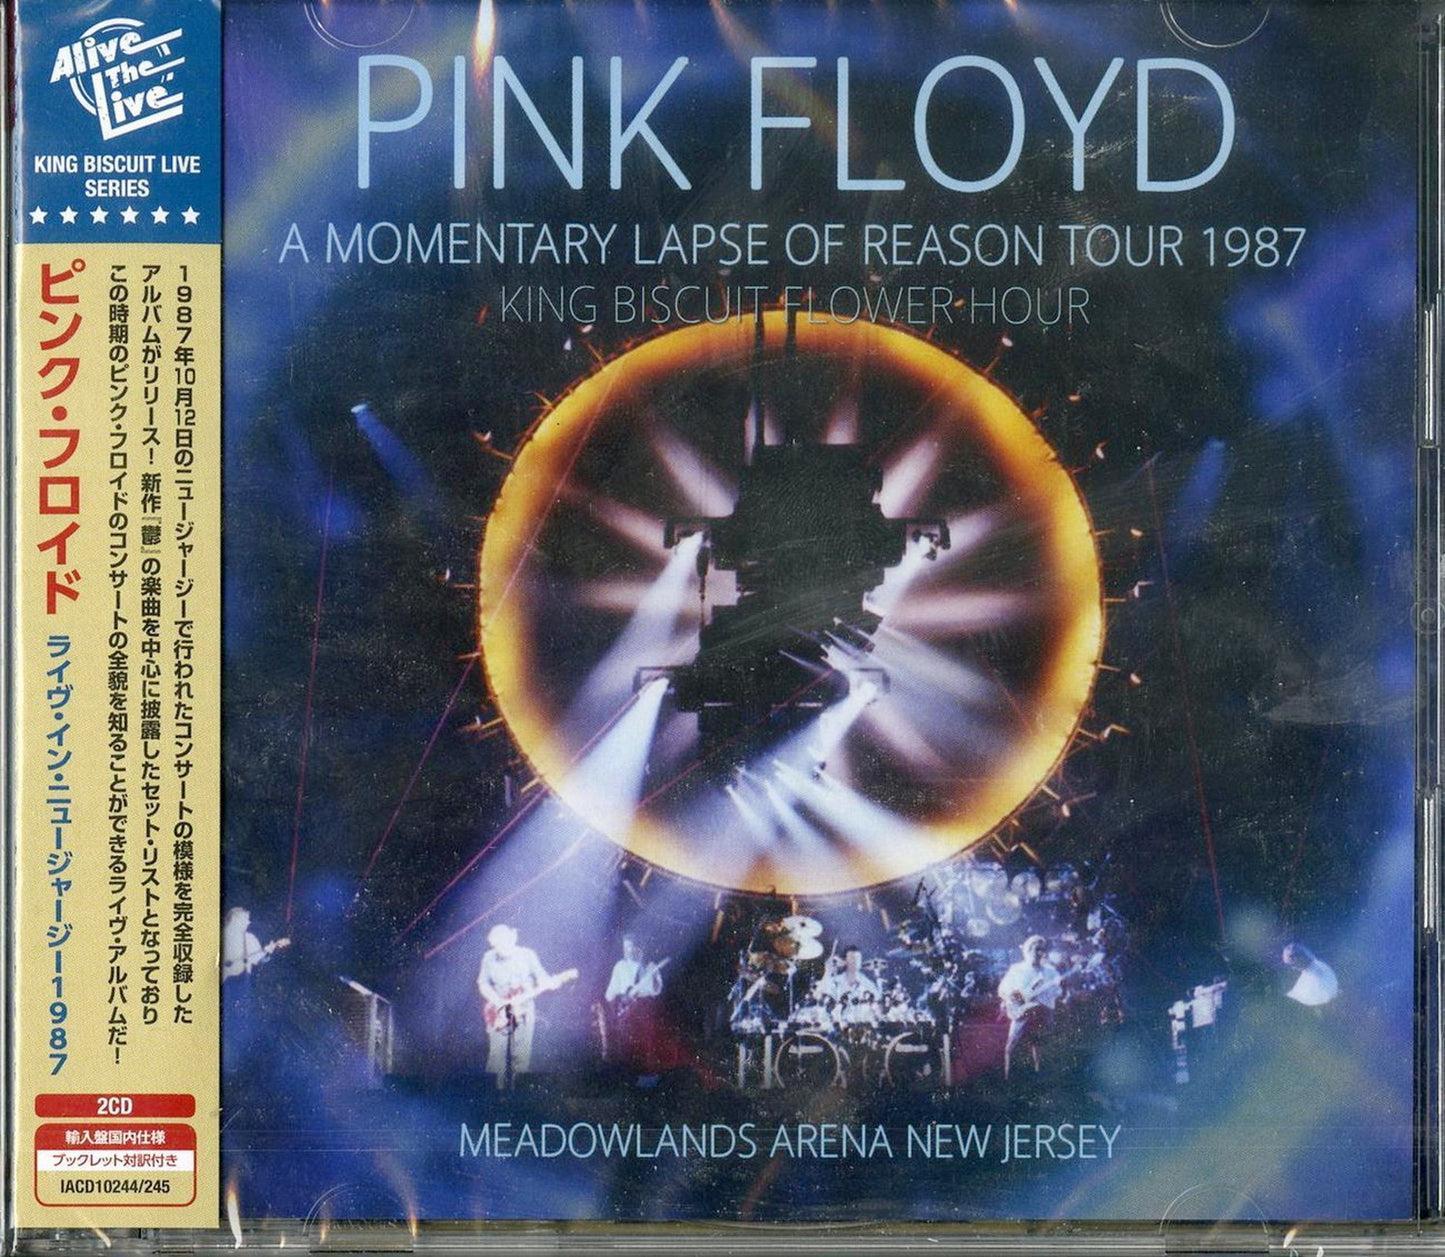 Pink Floyd - A Momentary Lapse Of Reason Tour 1987 King Biscuit Flower Hour - Import 2 CD